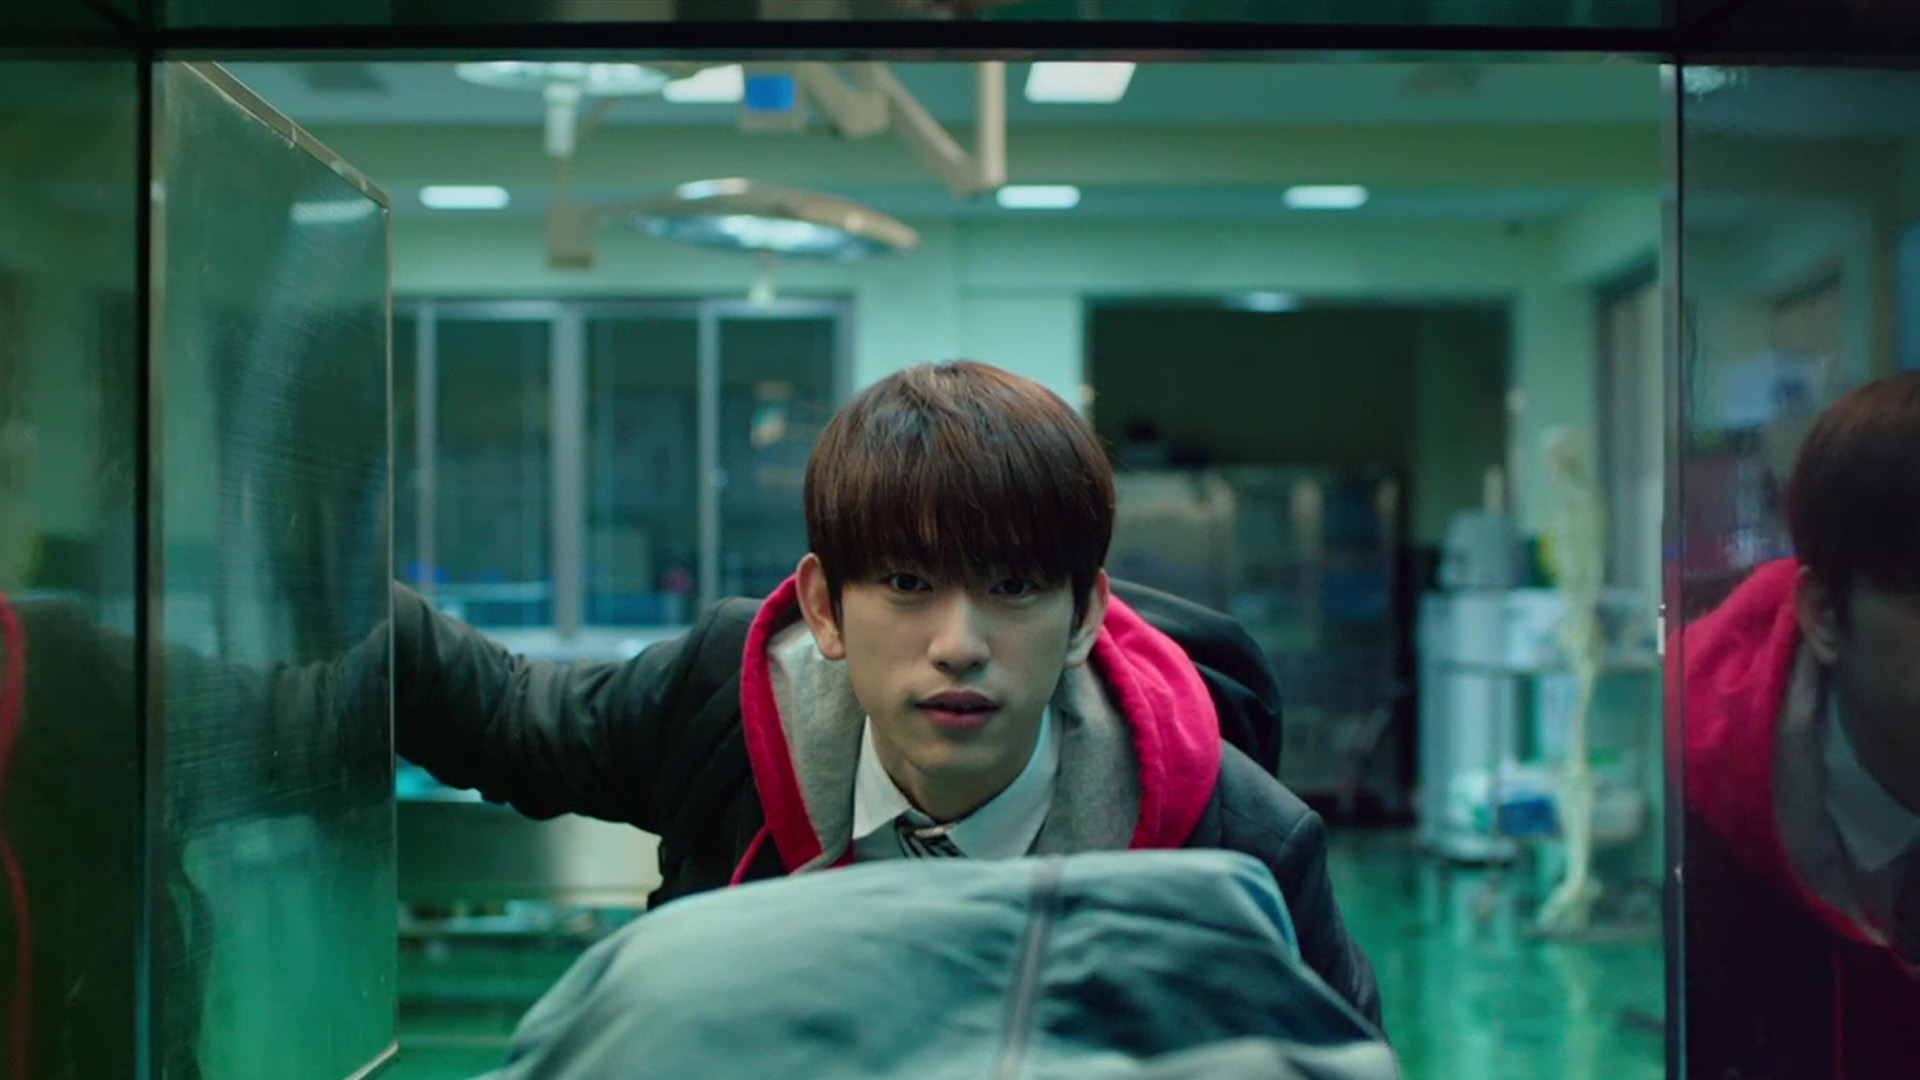 He is Psychometric Review